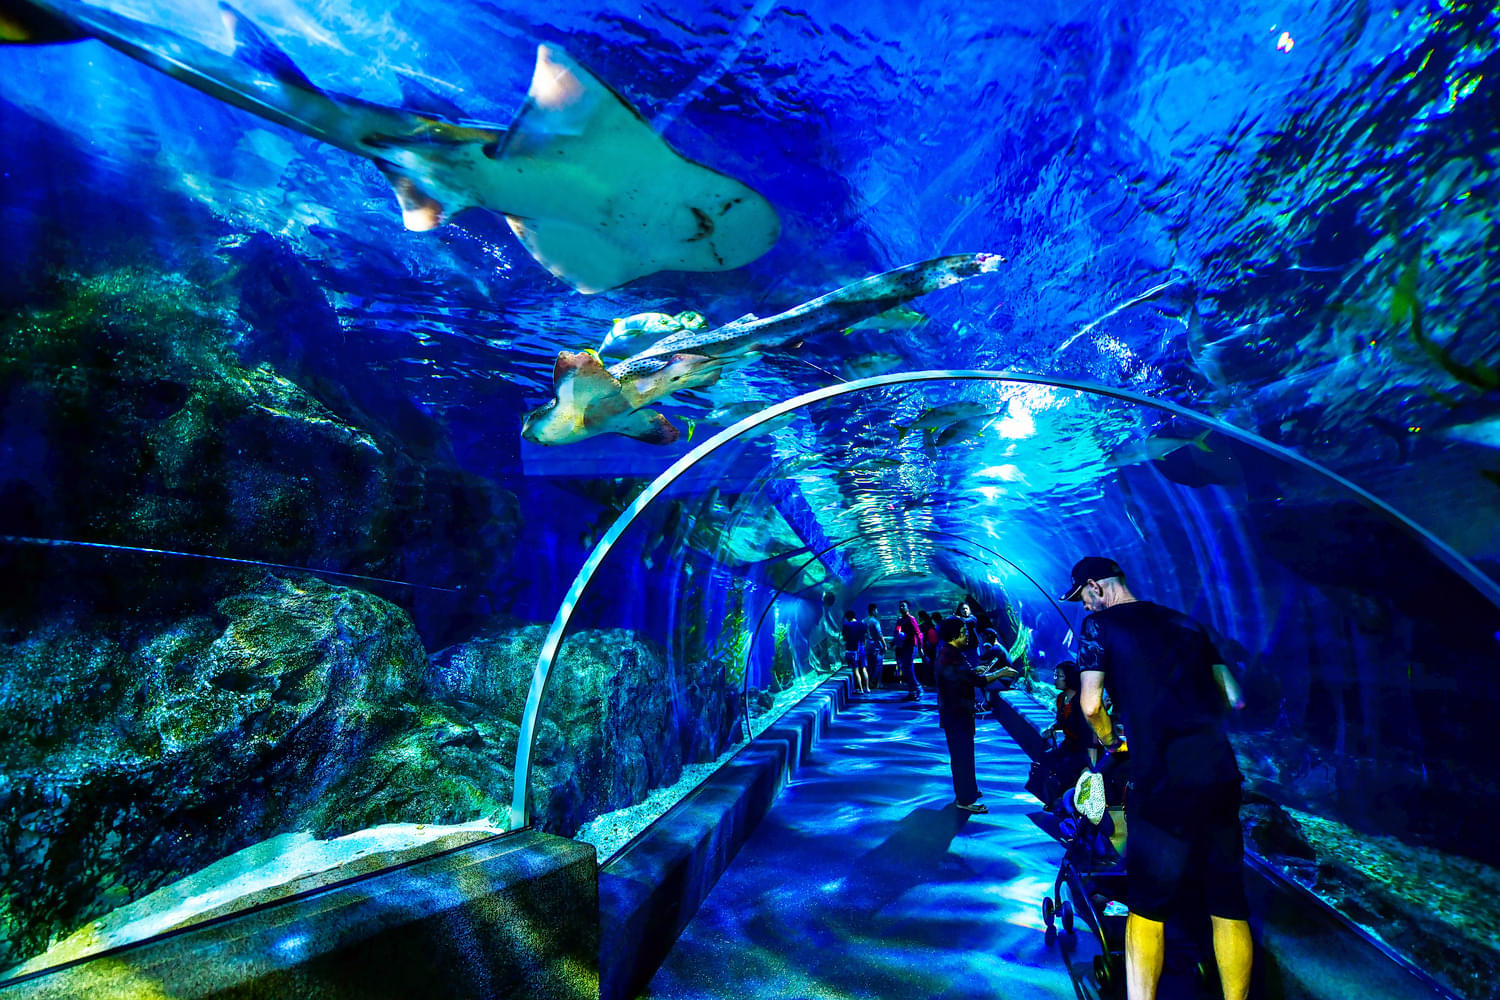 Explore one of the largest underwater aquariums in Southeast Asia